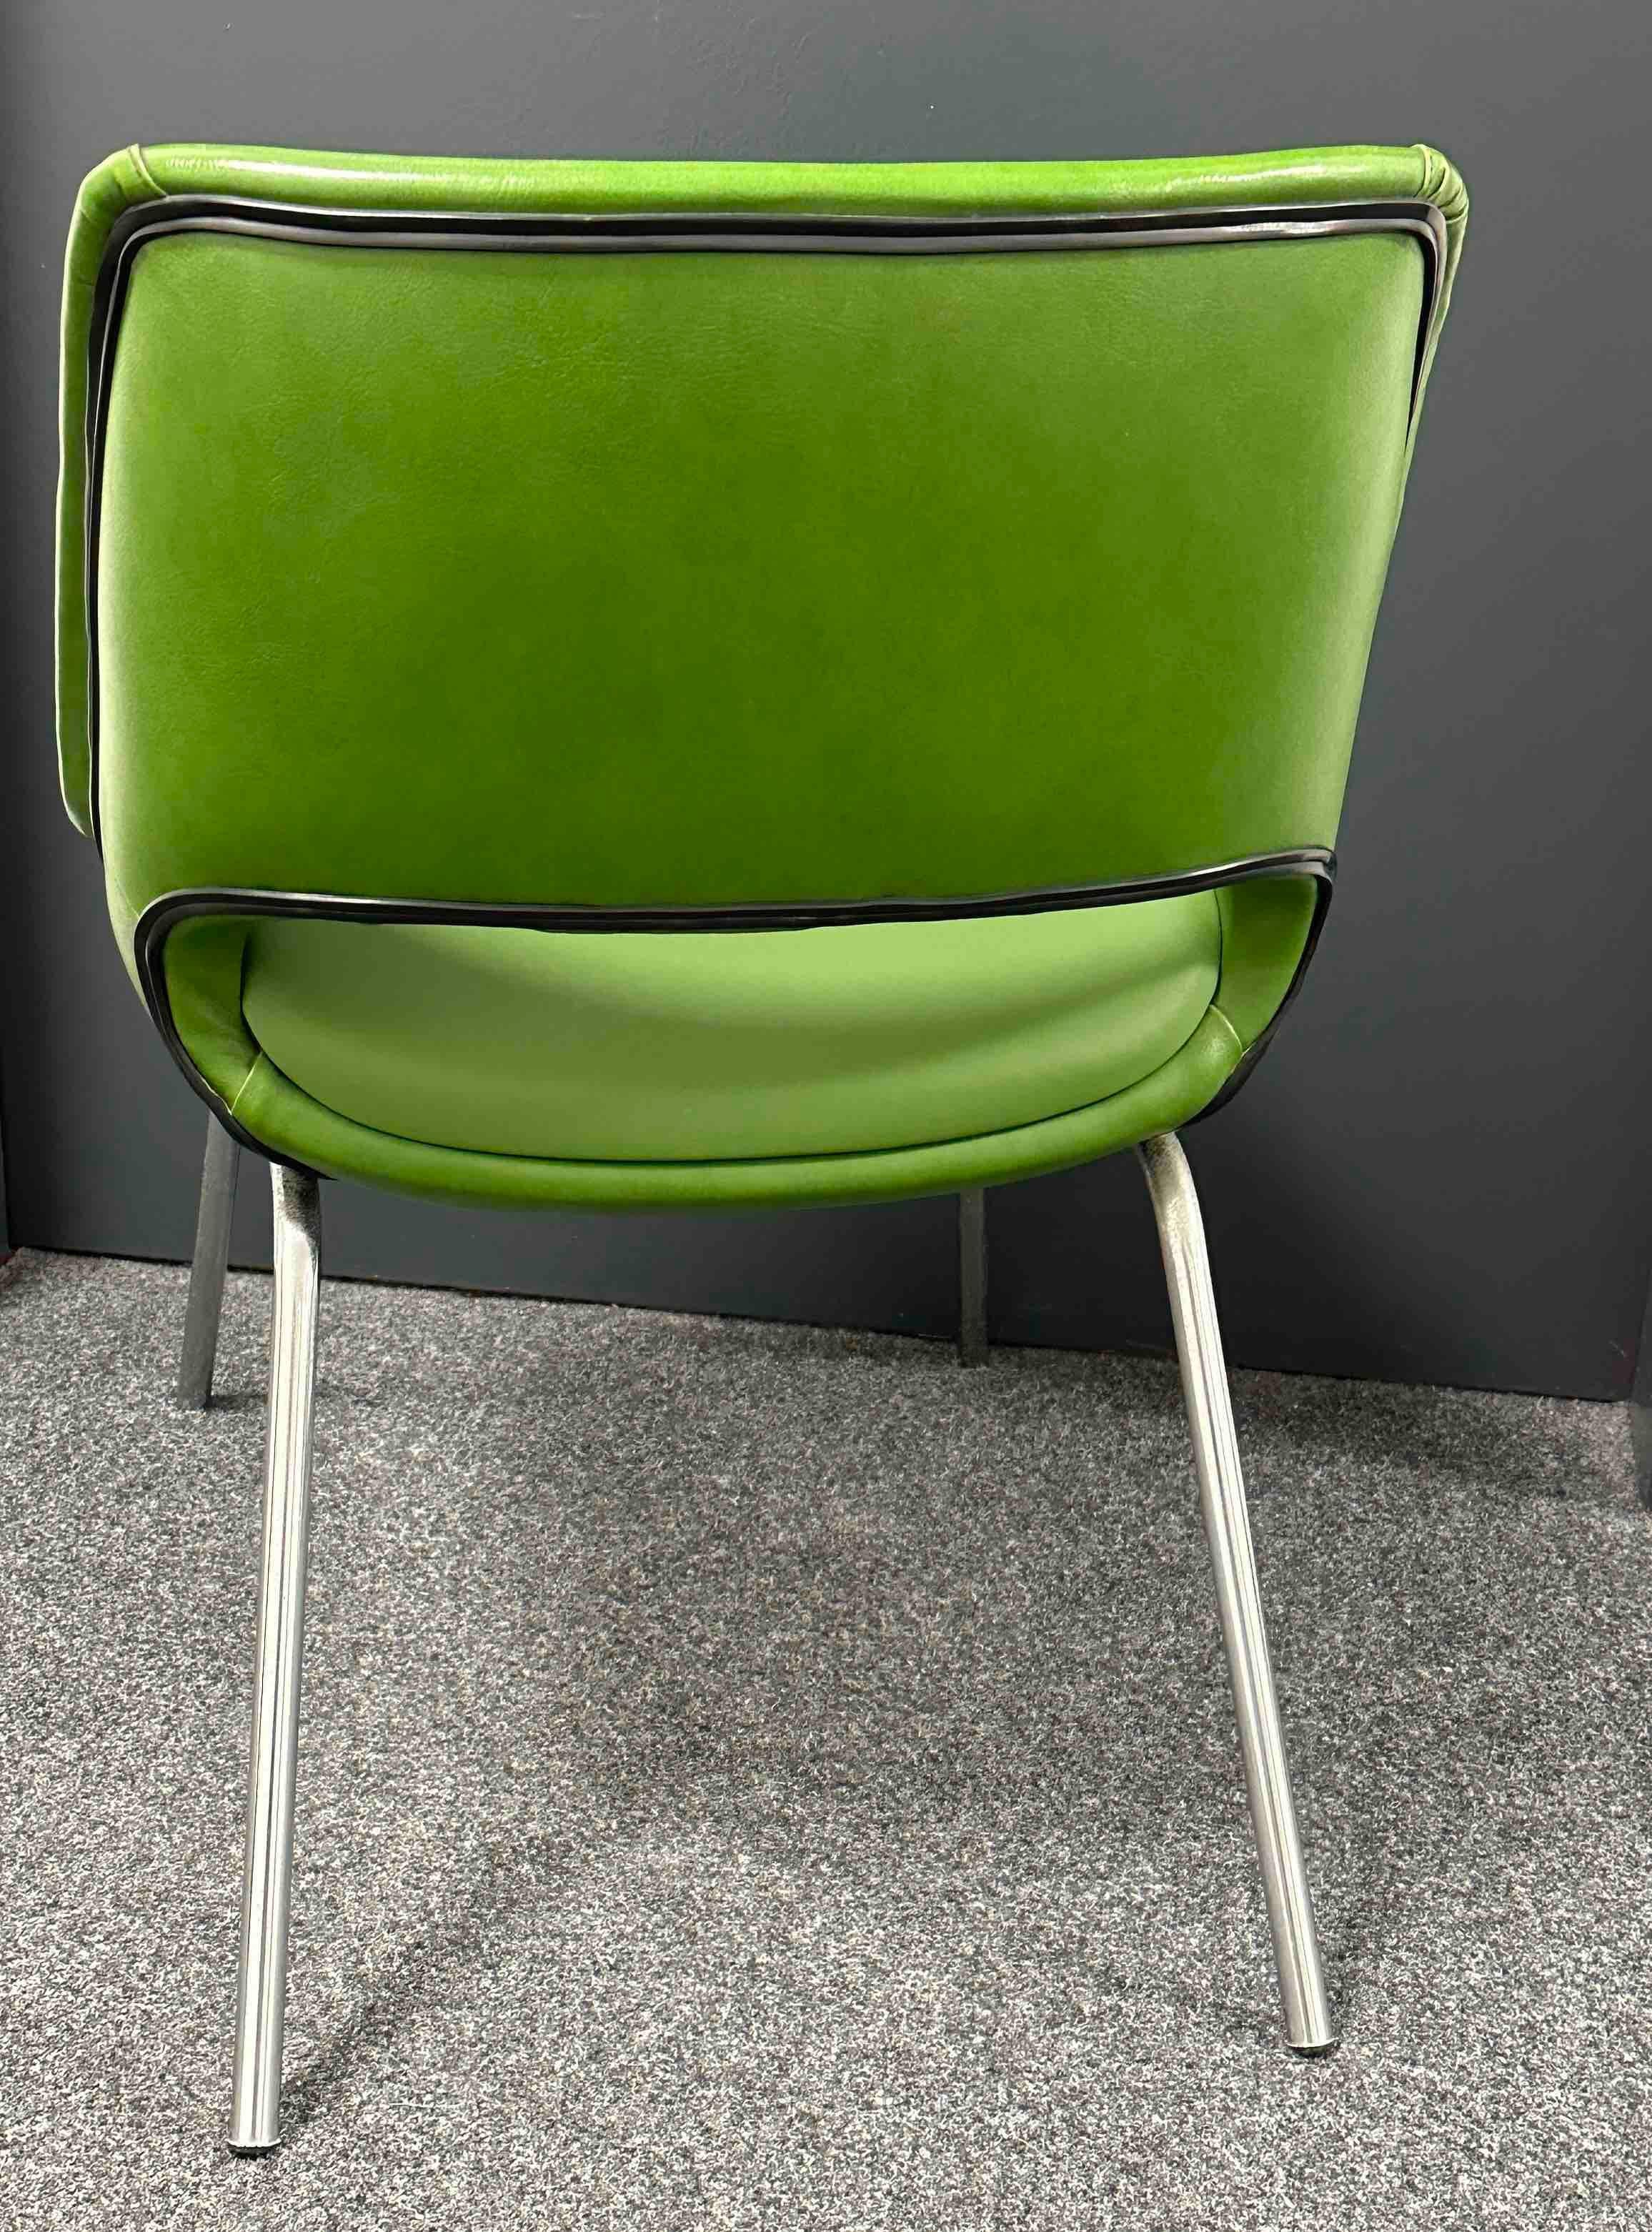 Two Chrome Base, Green Faux Leather Chairs Made by Blaha, Austria, 1970s For Sale 4